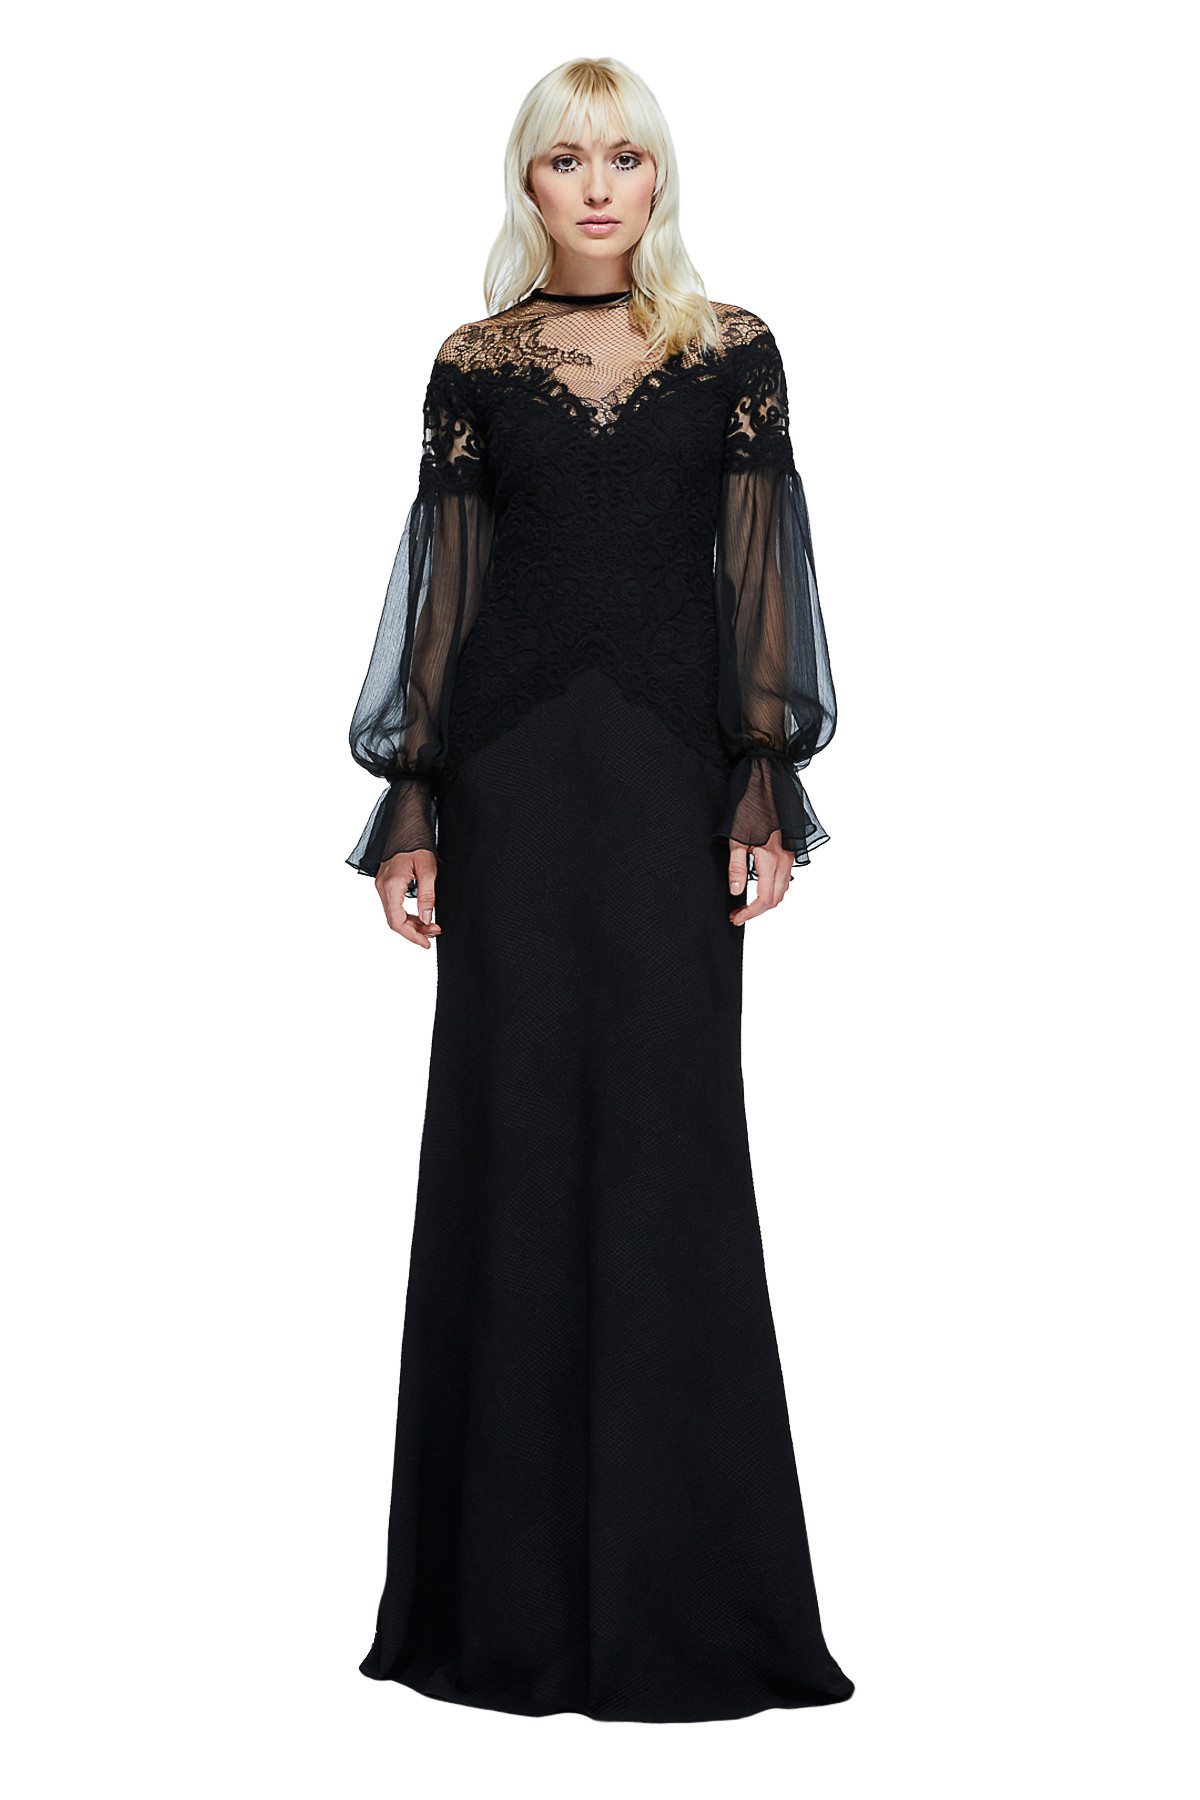 Platinum blonde model posing in dramatic lace neckline with full sheer sleeves Tadashi Shoji gown